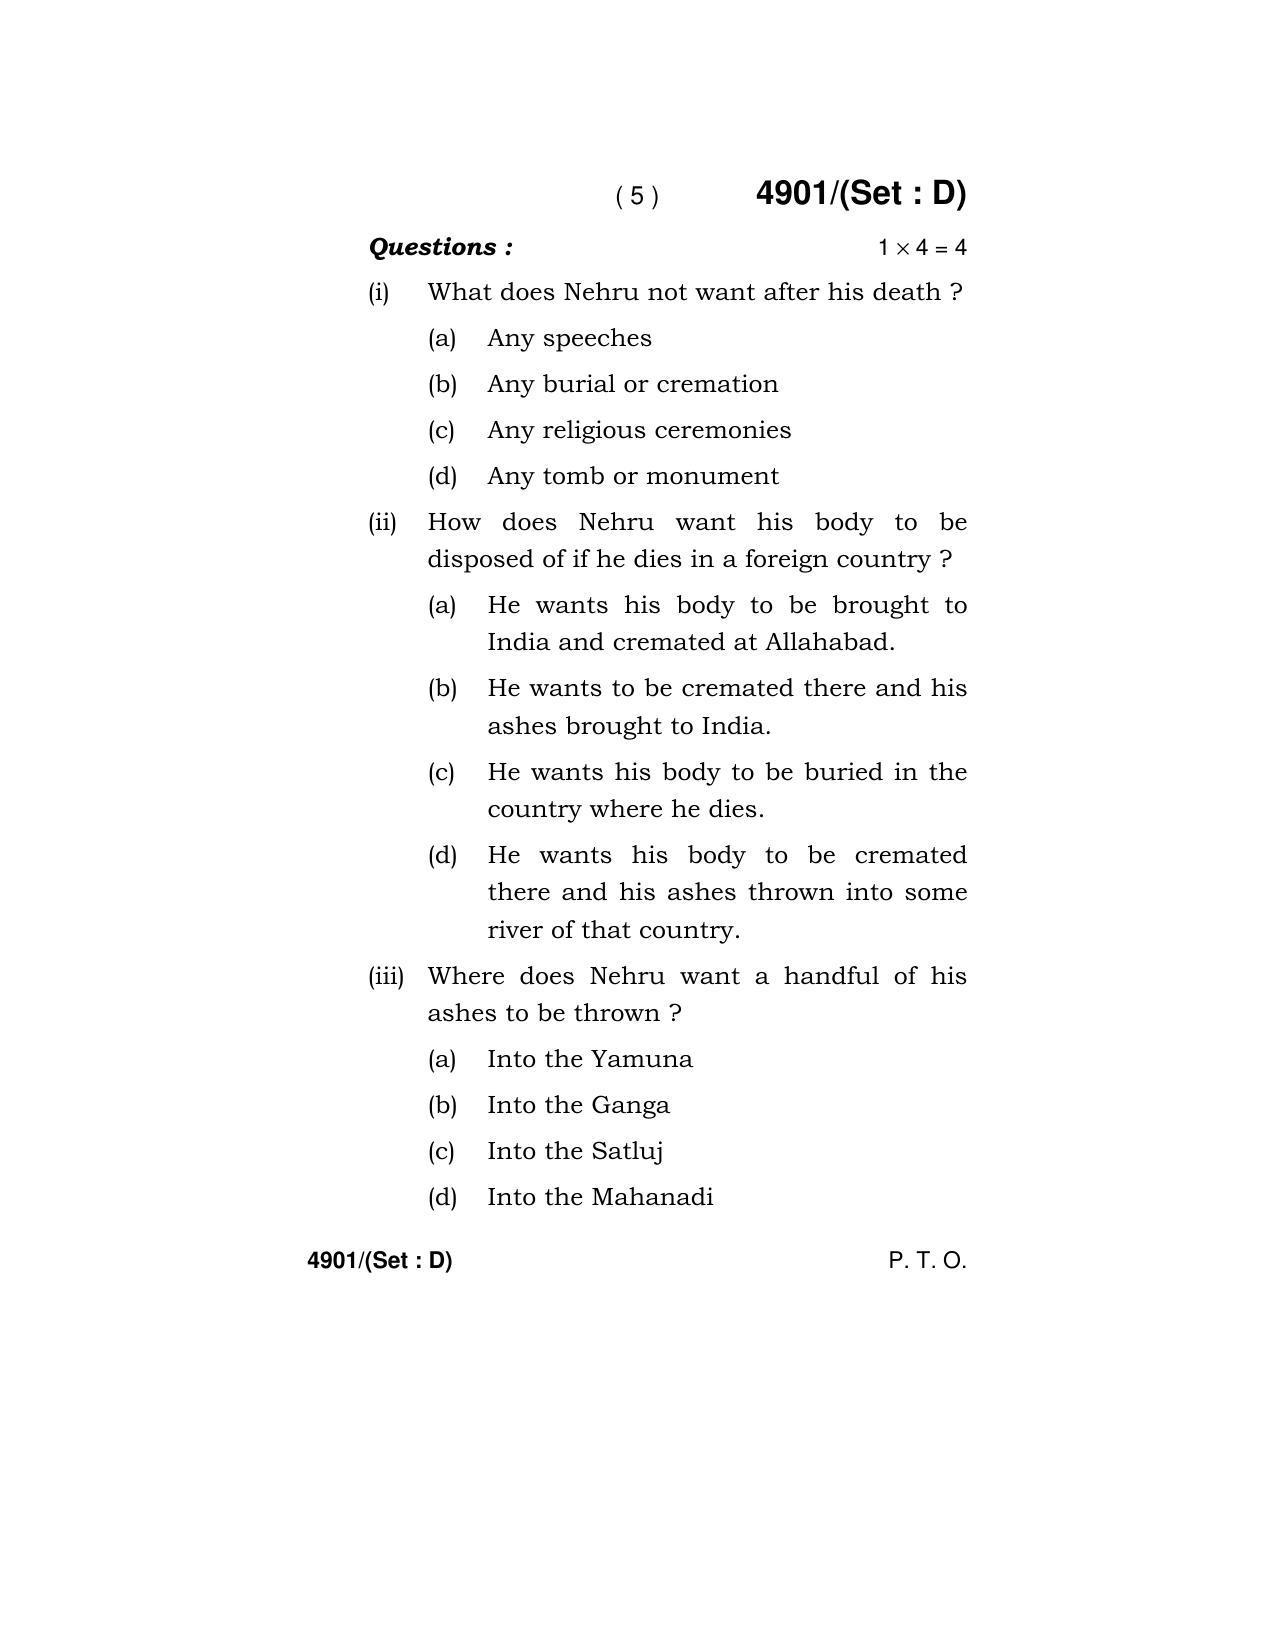 Haryana Board HBSE Class 12 English Core 2020 Question Paper - Page 53